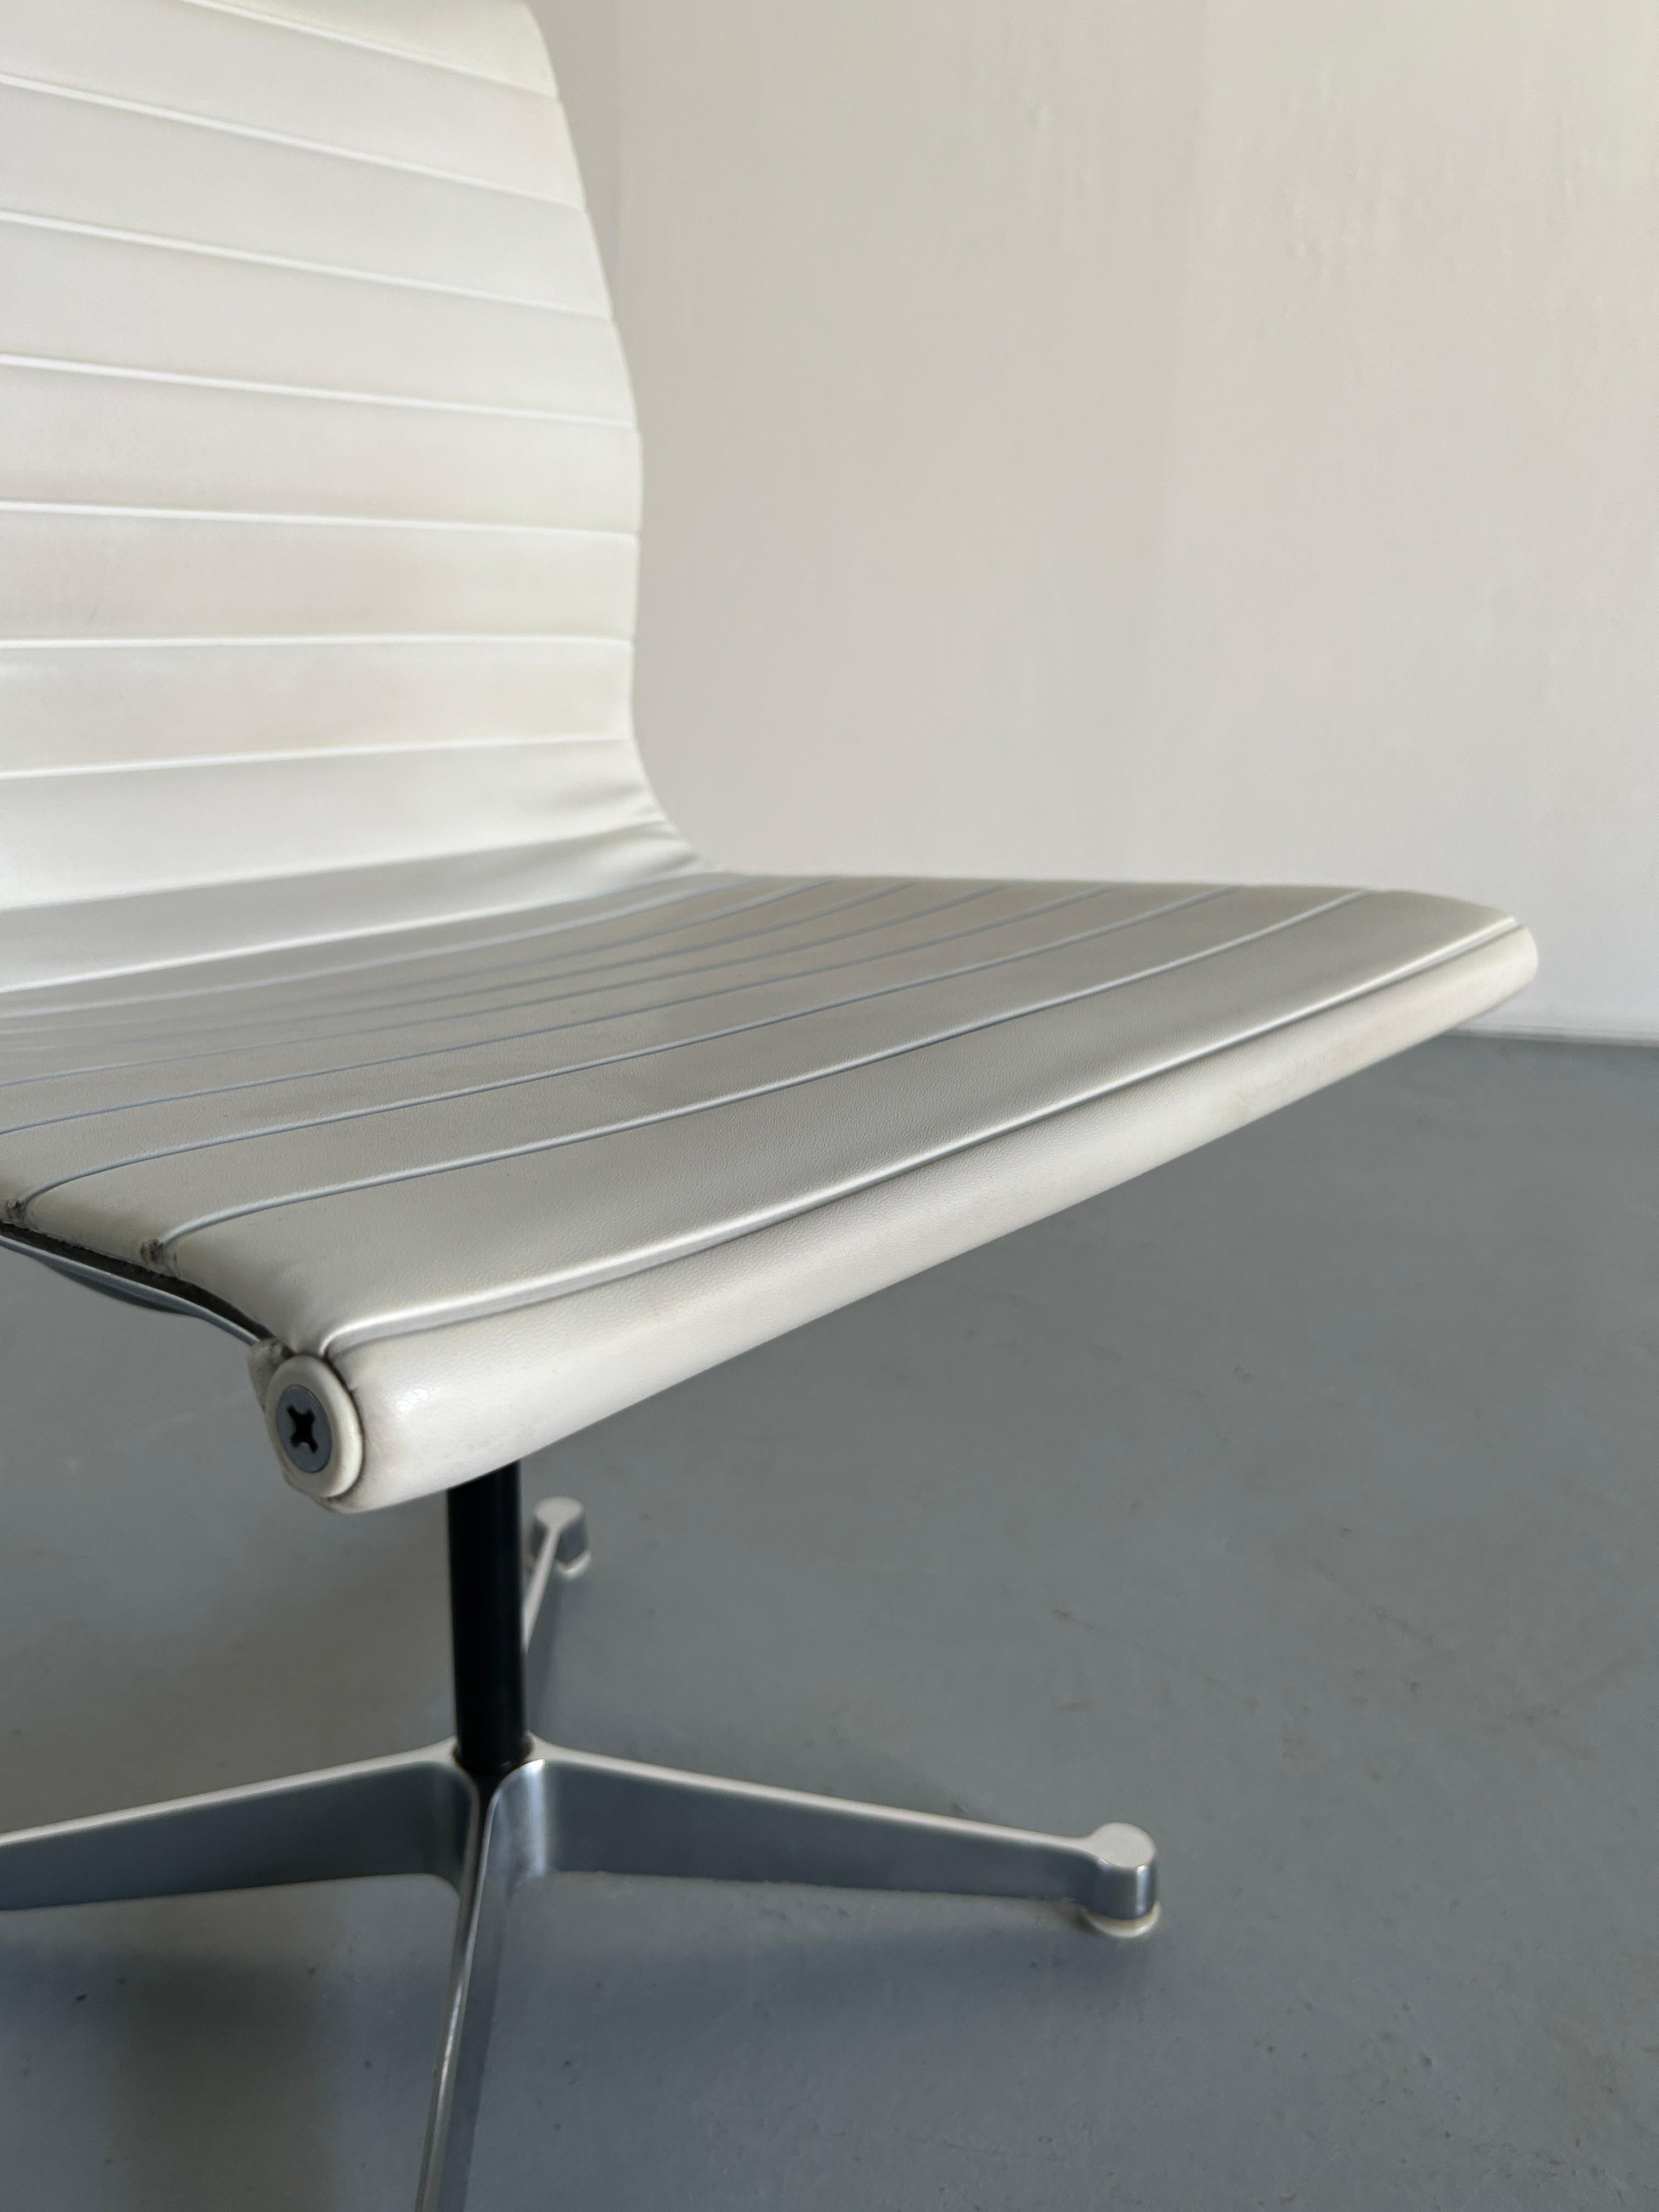 1 of 5 Original Vintage 'EA 107' Aluminium Desk Chairs by Charles & Ray Eames For Sale 6